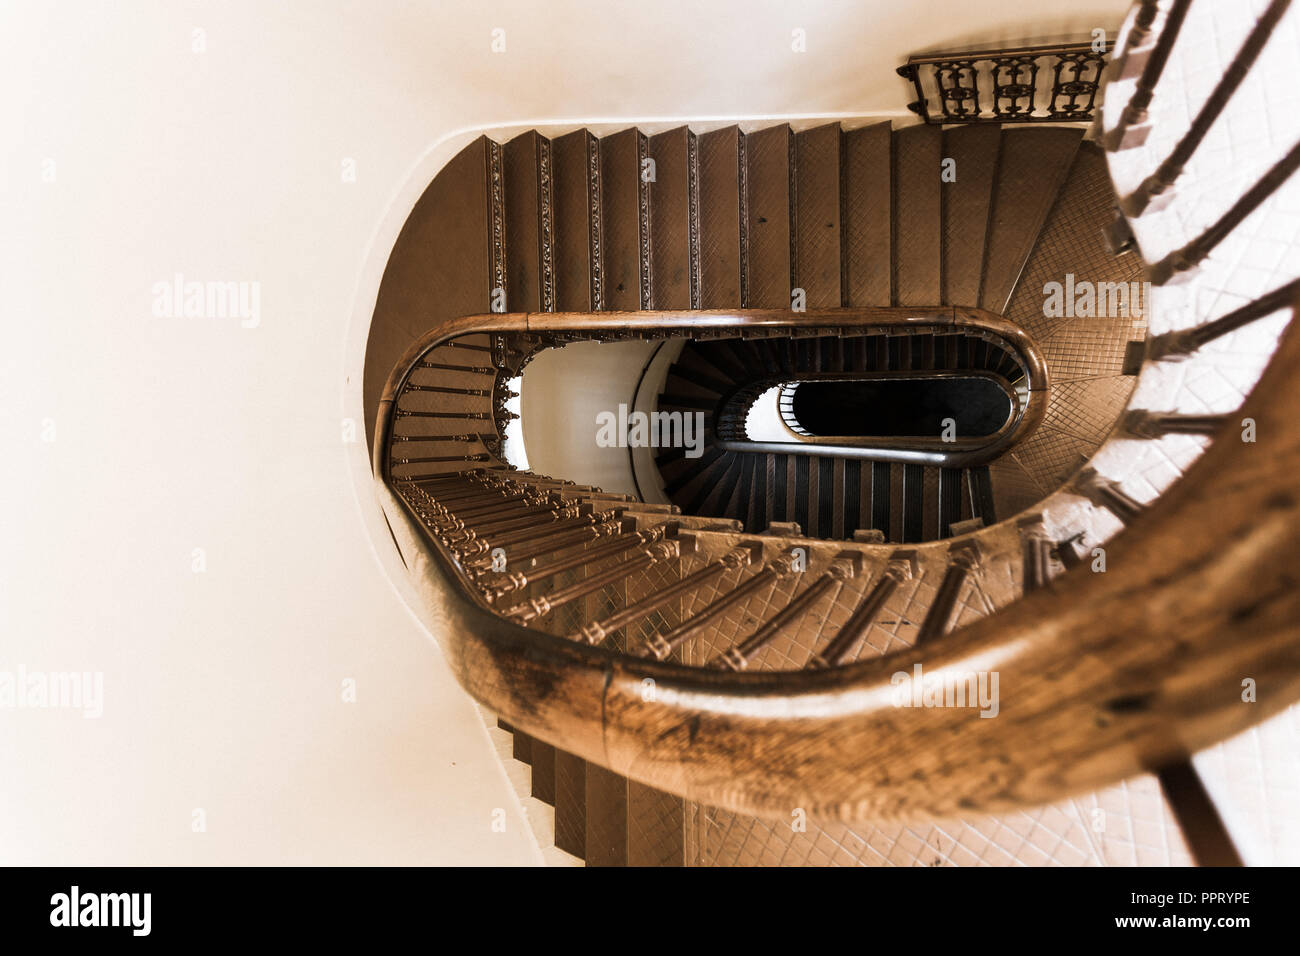 Oval shaped spiral vintage staircase with wrought iron and wooden railing Stock Photo